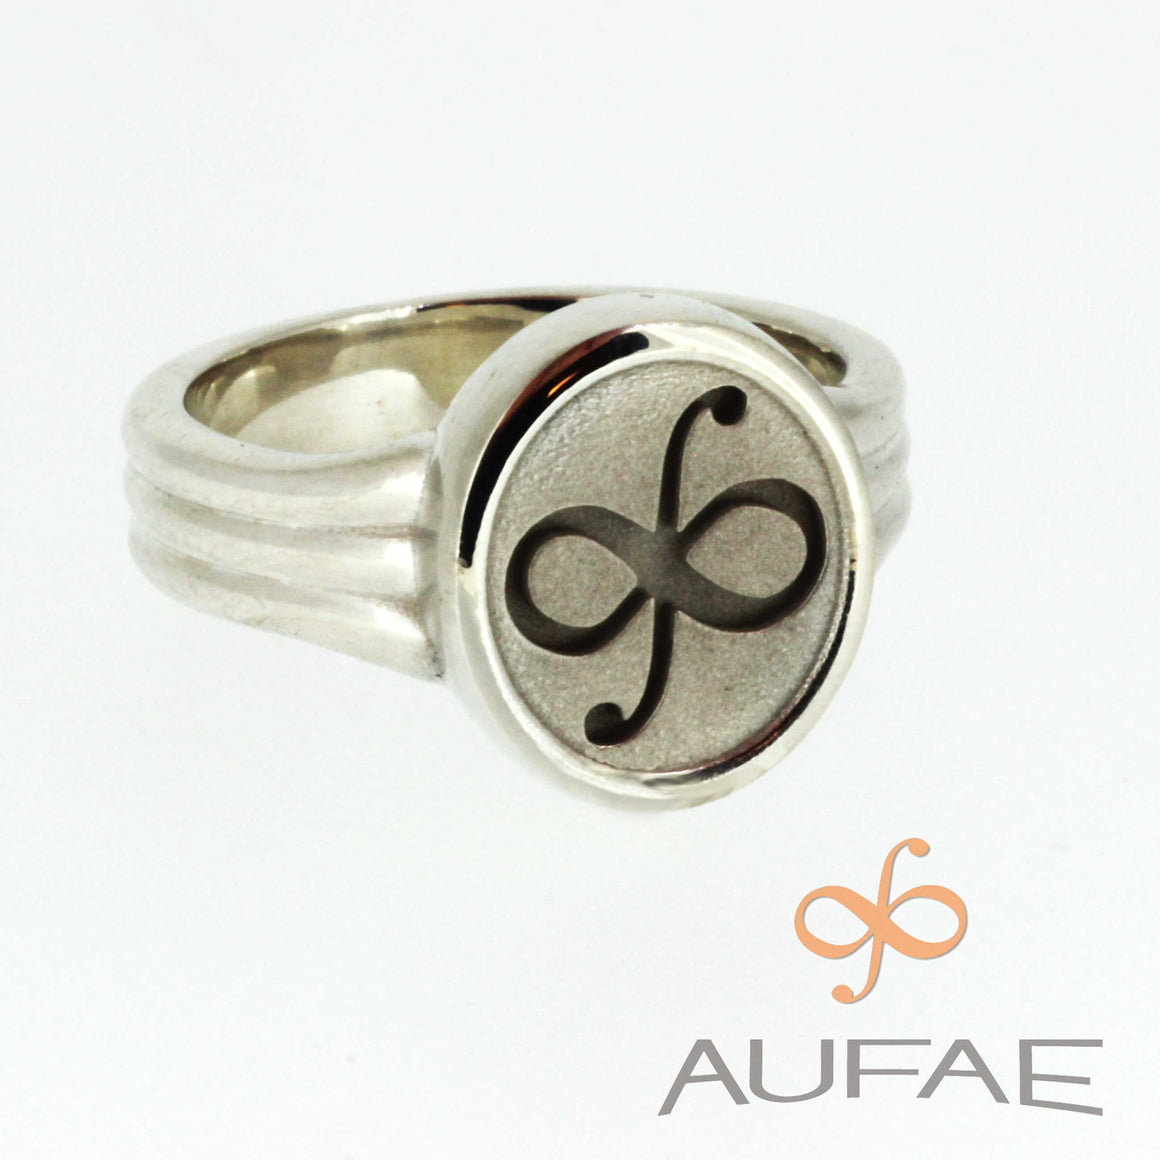 Aufae Logo Ring in Solid Sterling Silver with recessed logo